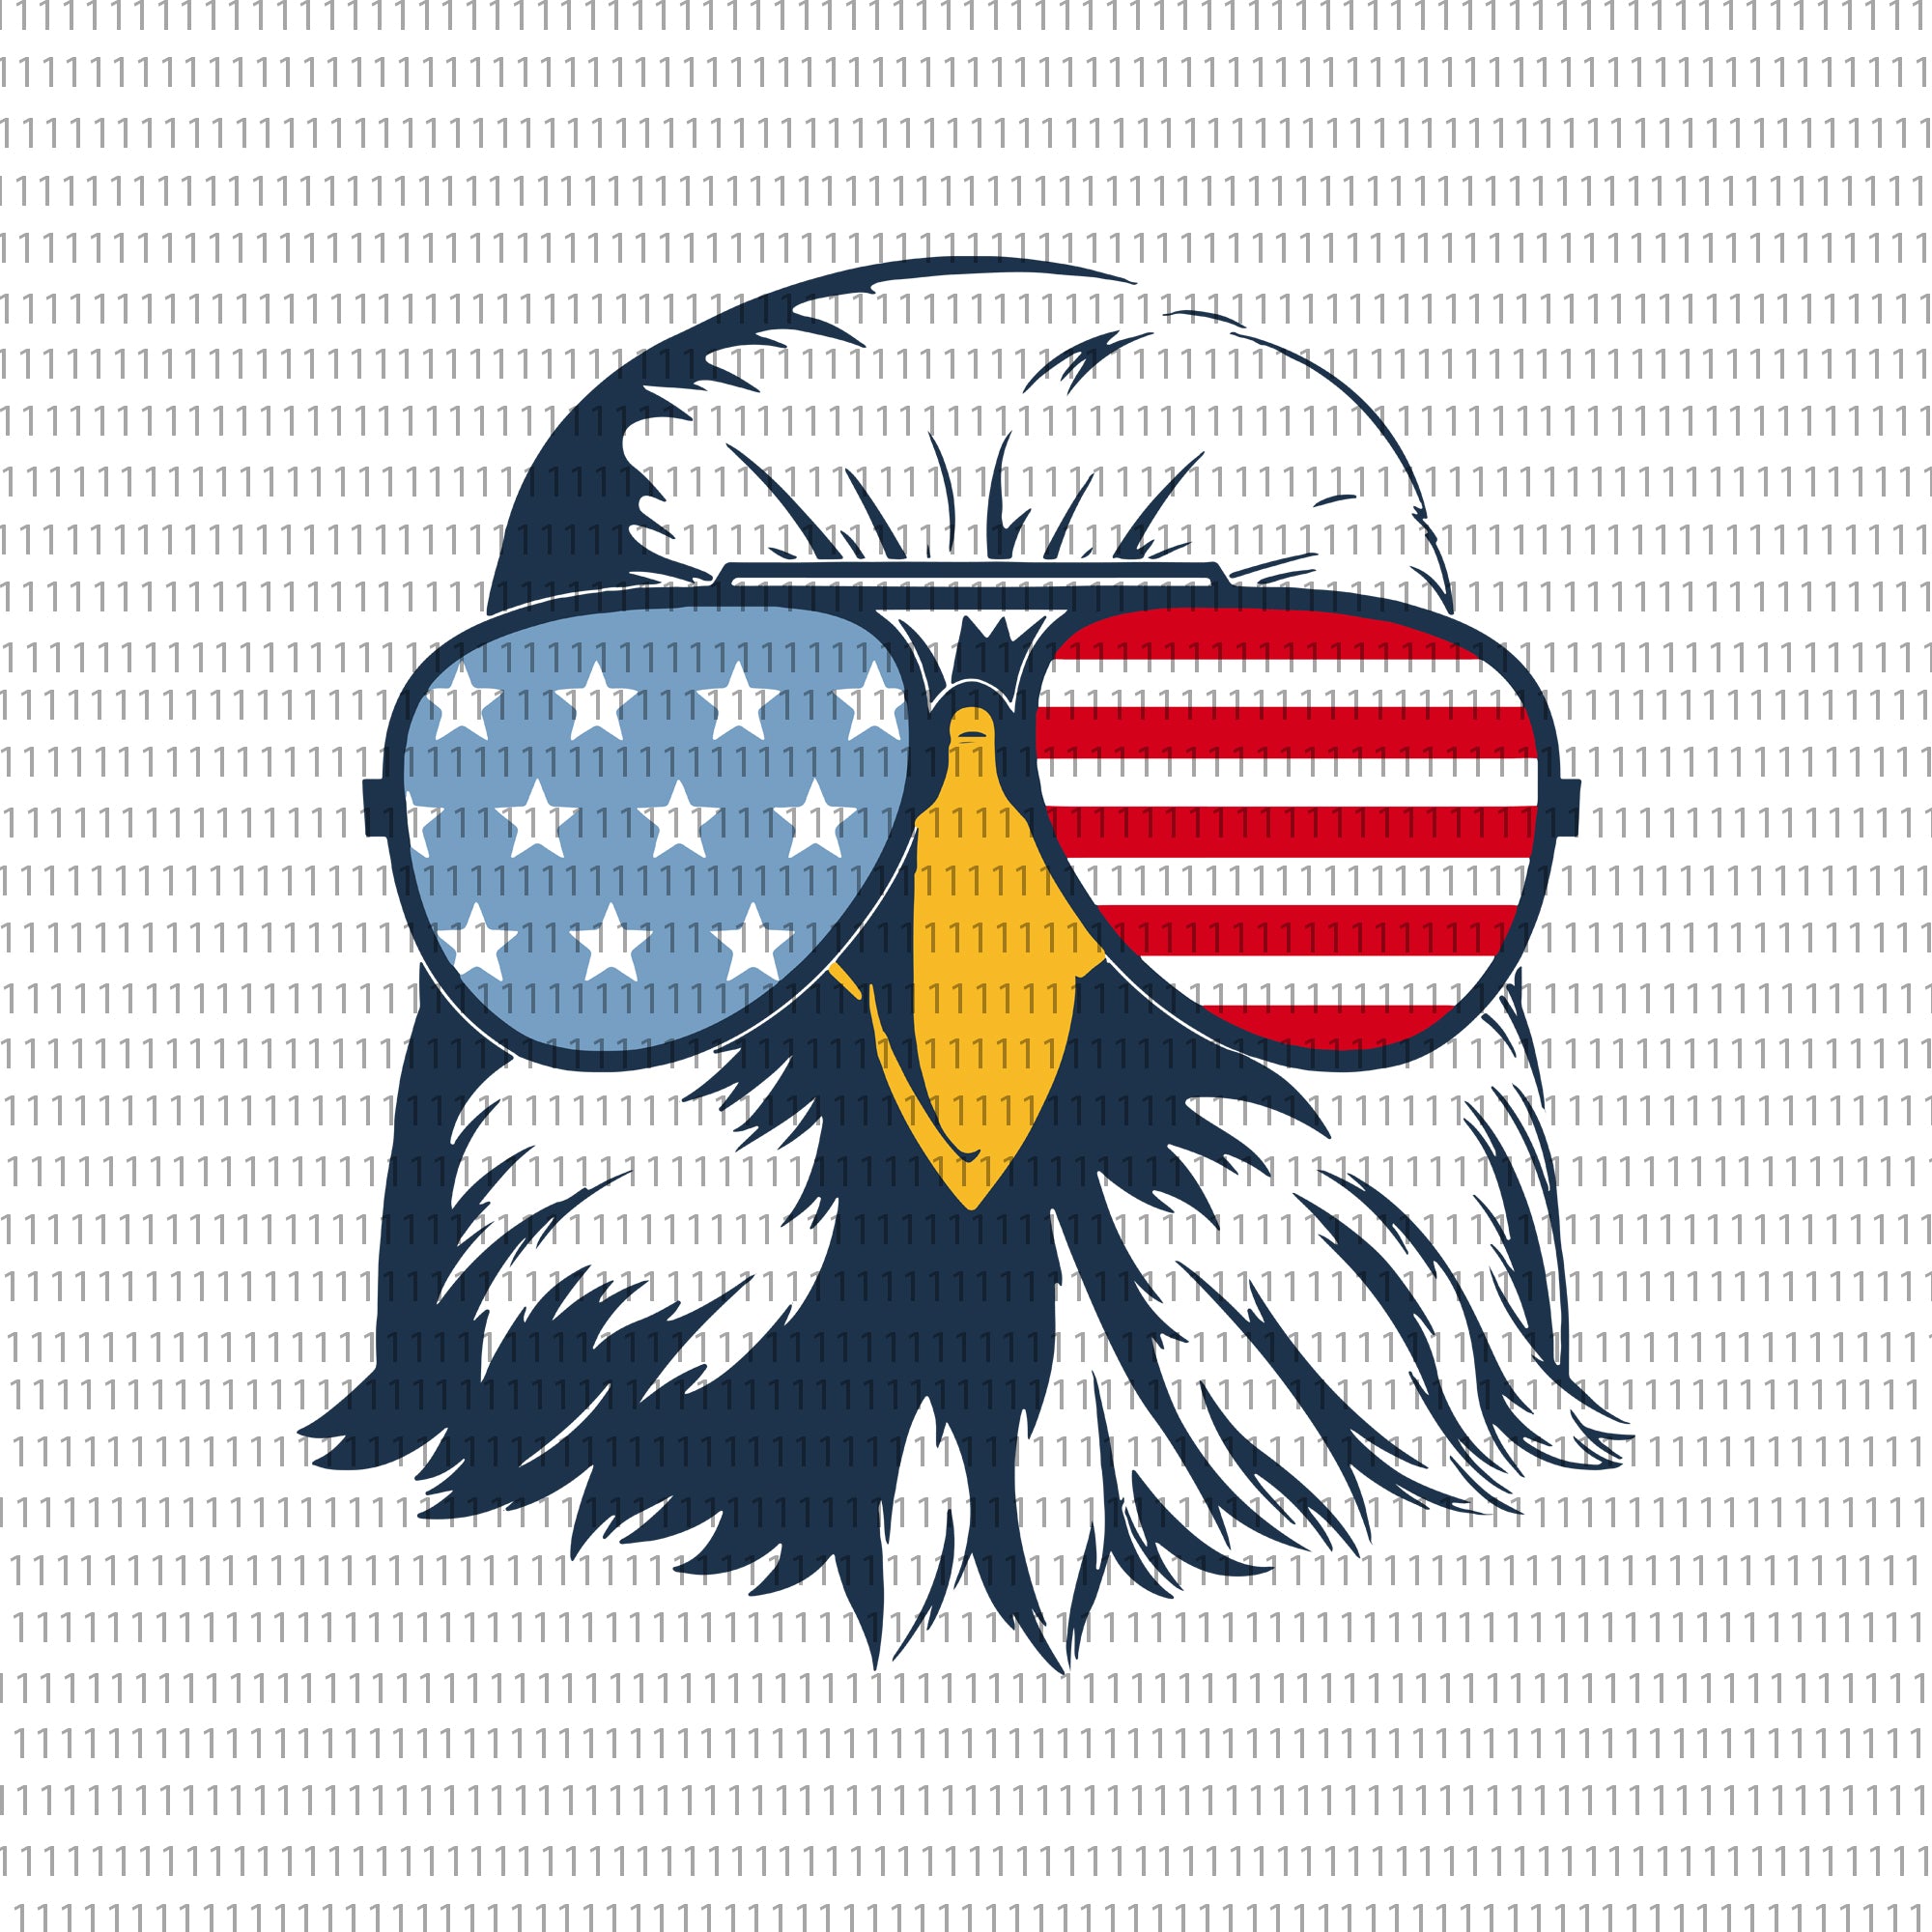 Download Patriotic Eagle With Sunglasses Svg Patriotic Eagle With Sunglasses Buydesigntshirt